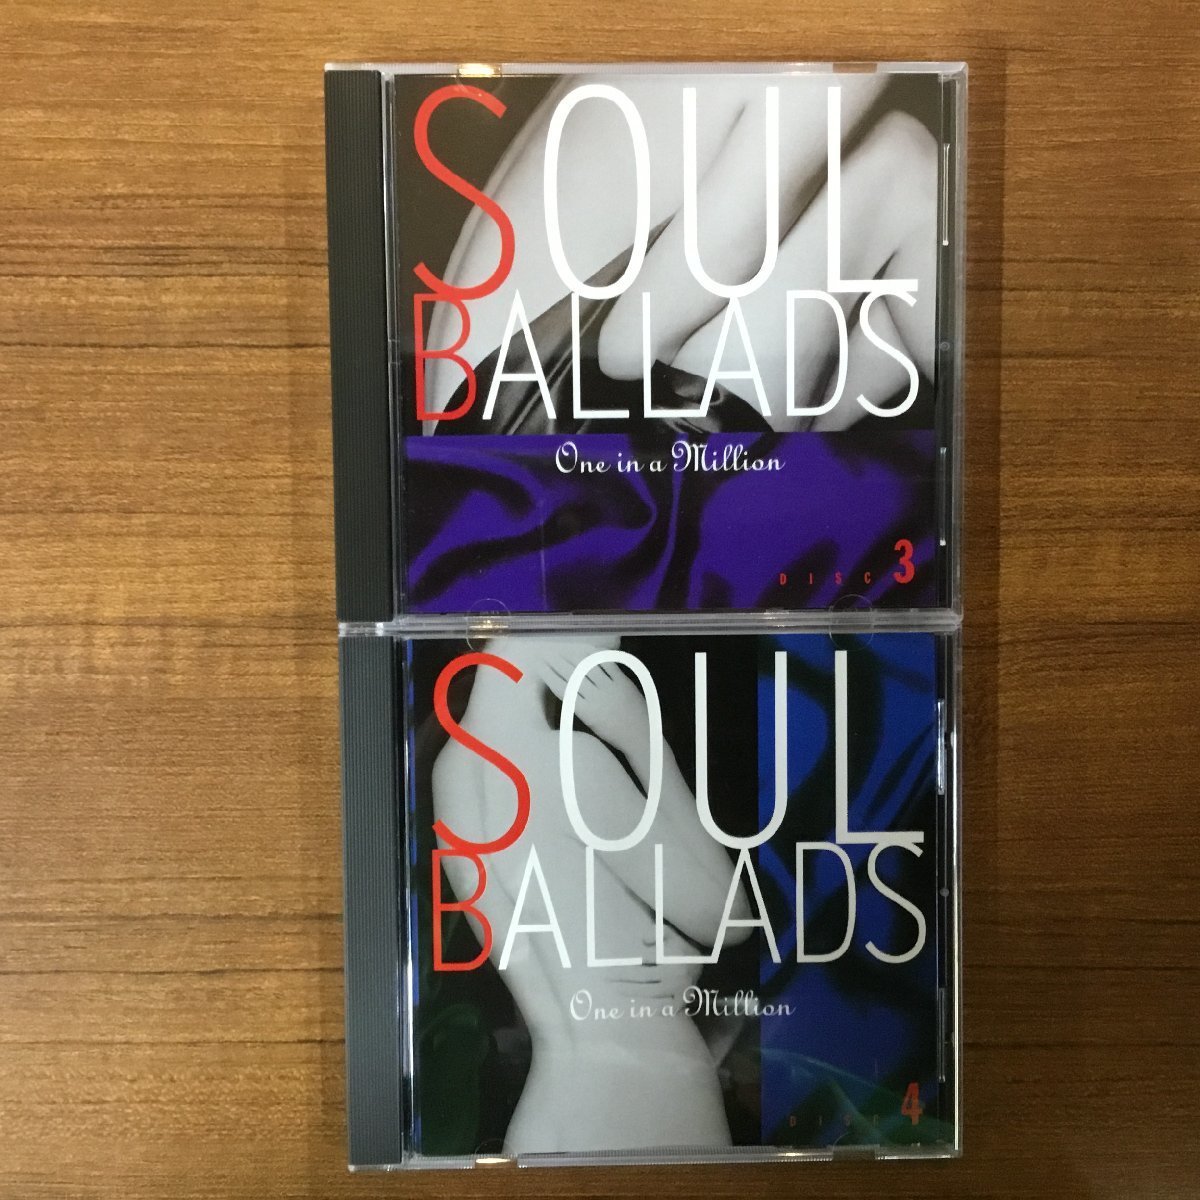  valuable records out of production SOUL BALLADS One in a Million domestic record 7 sheets set Kirameki ....R&B masterpiece full load . bending absolutely not equipped. un- .. masterpiece *. large become music . production 